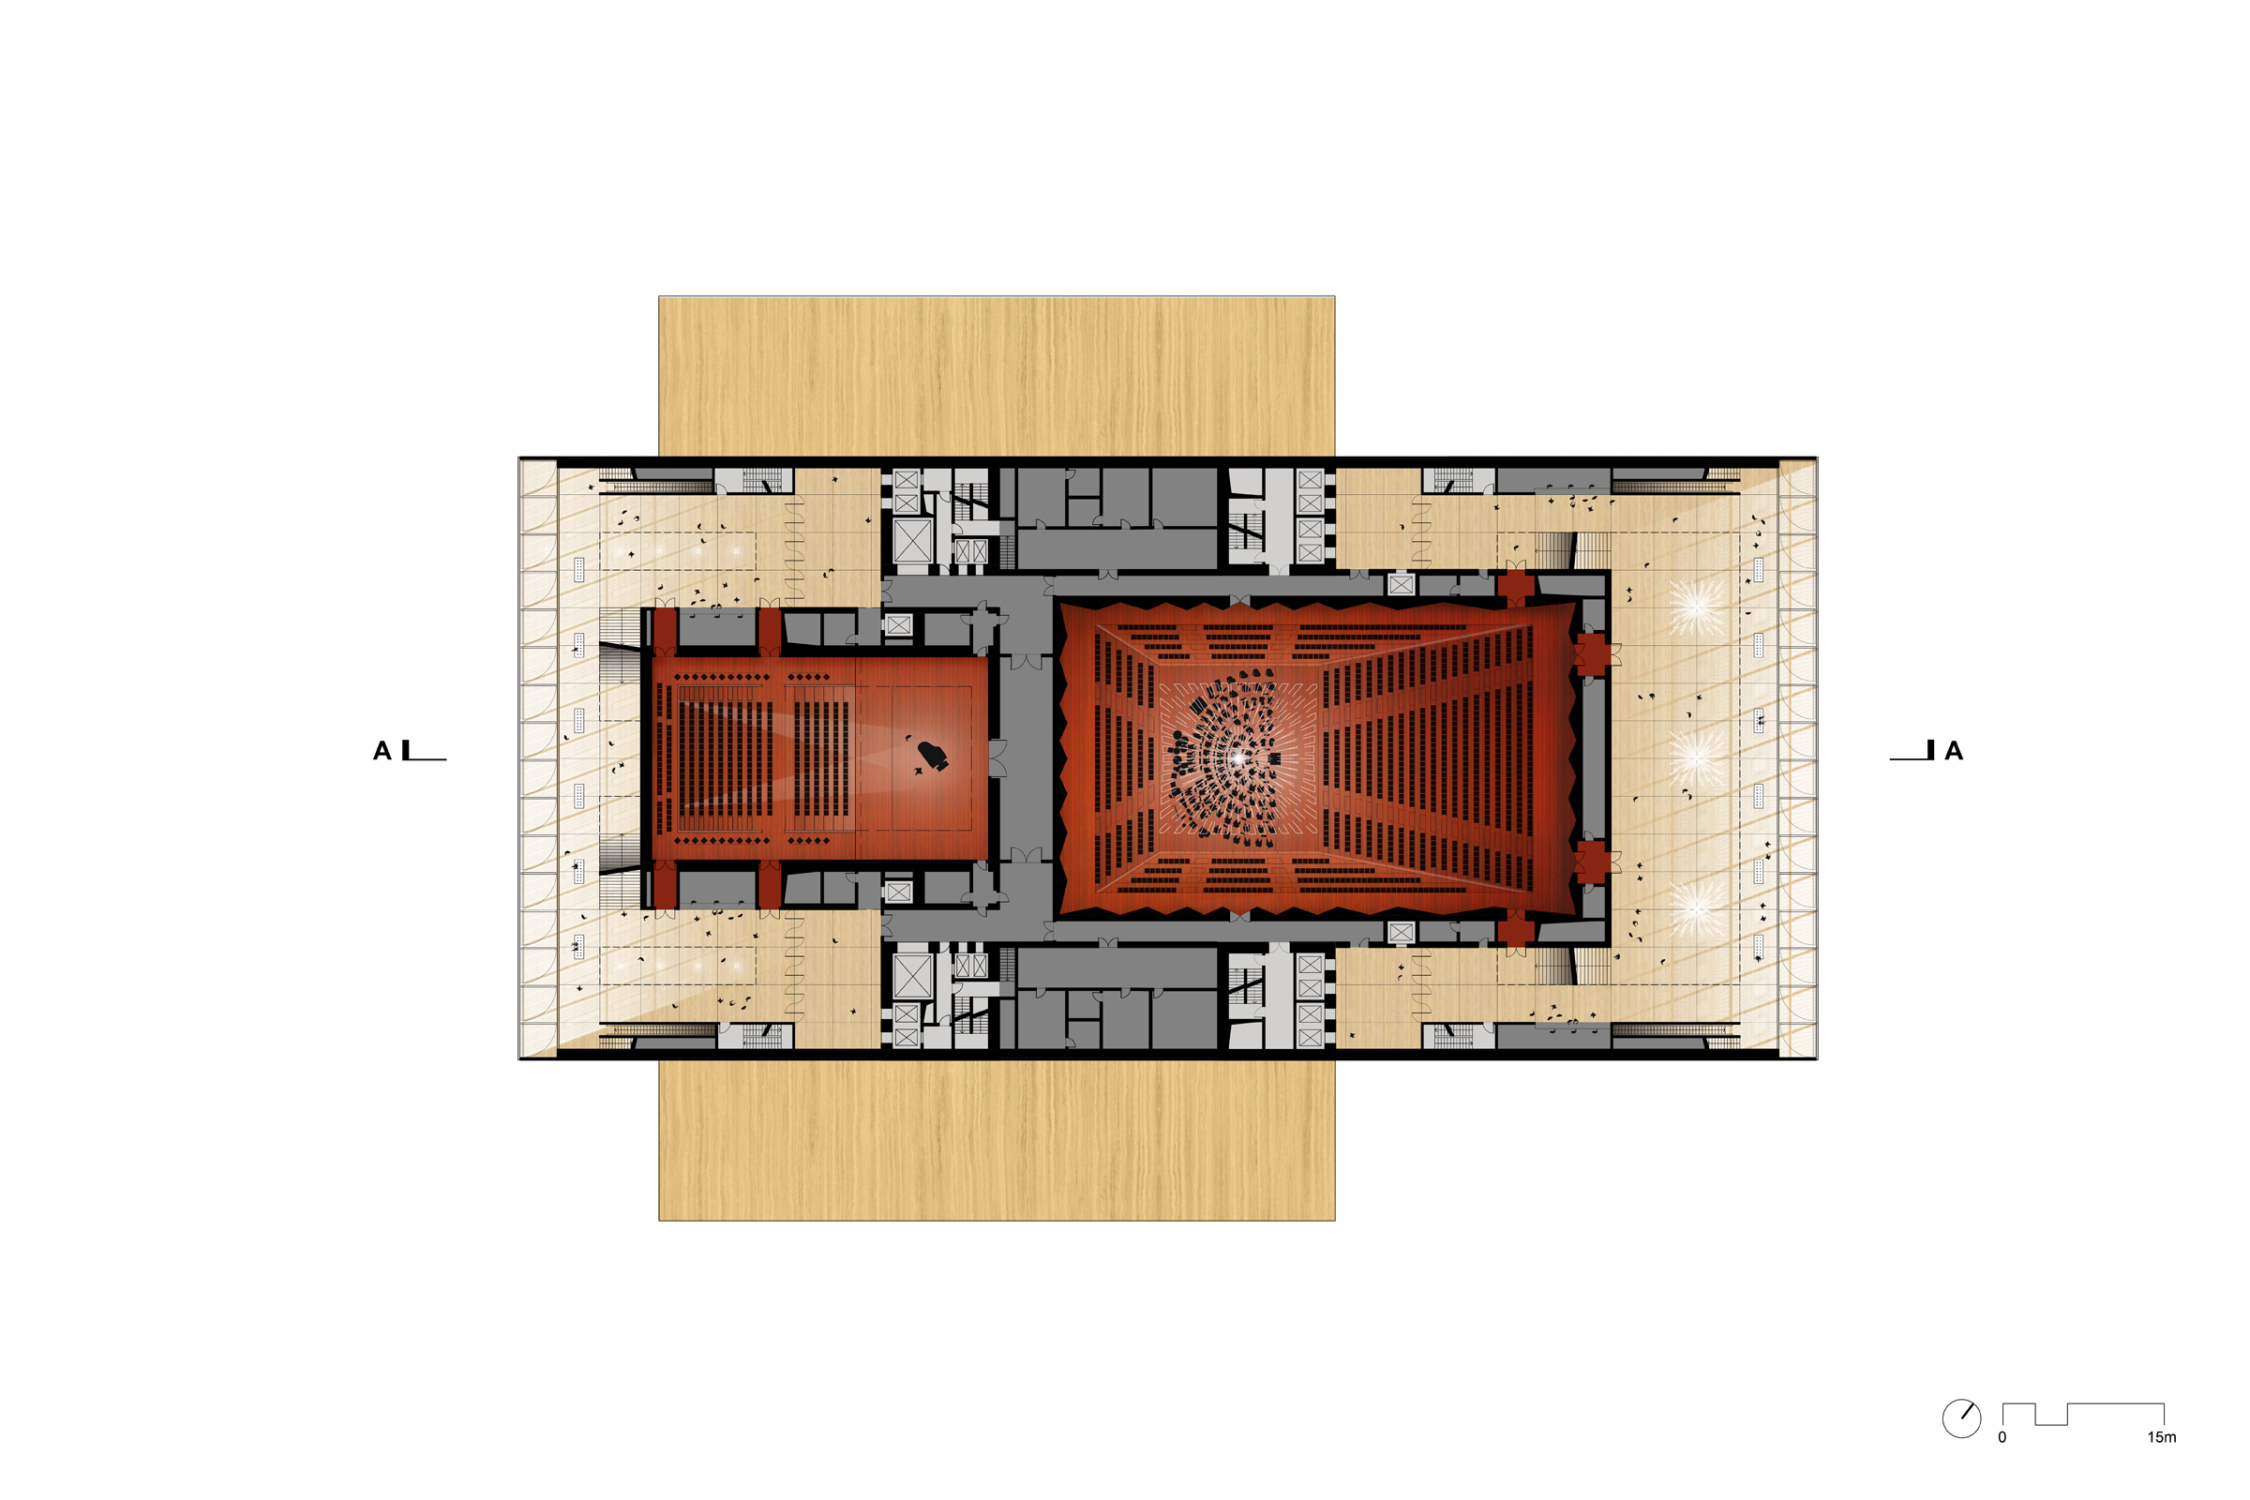 Shenzhen Opera House's Concert Hall and Multifunctional Theater Plan.